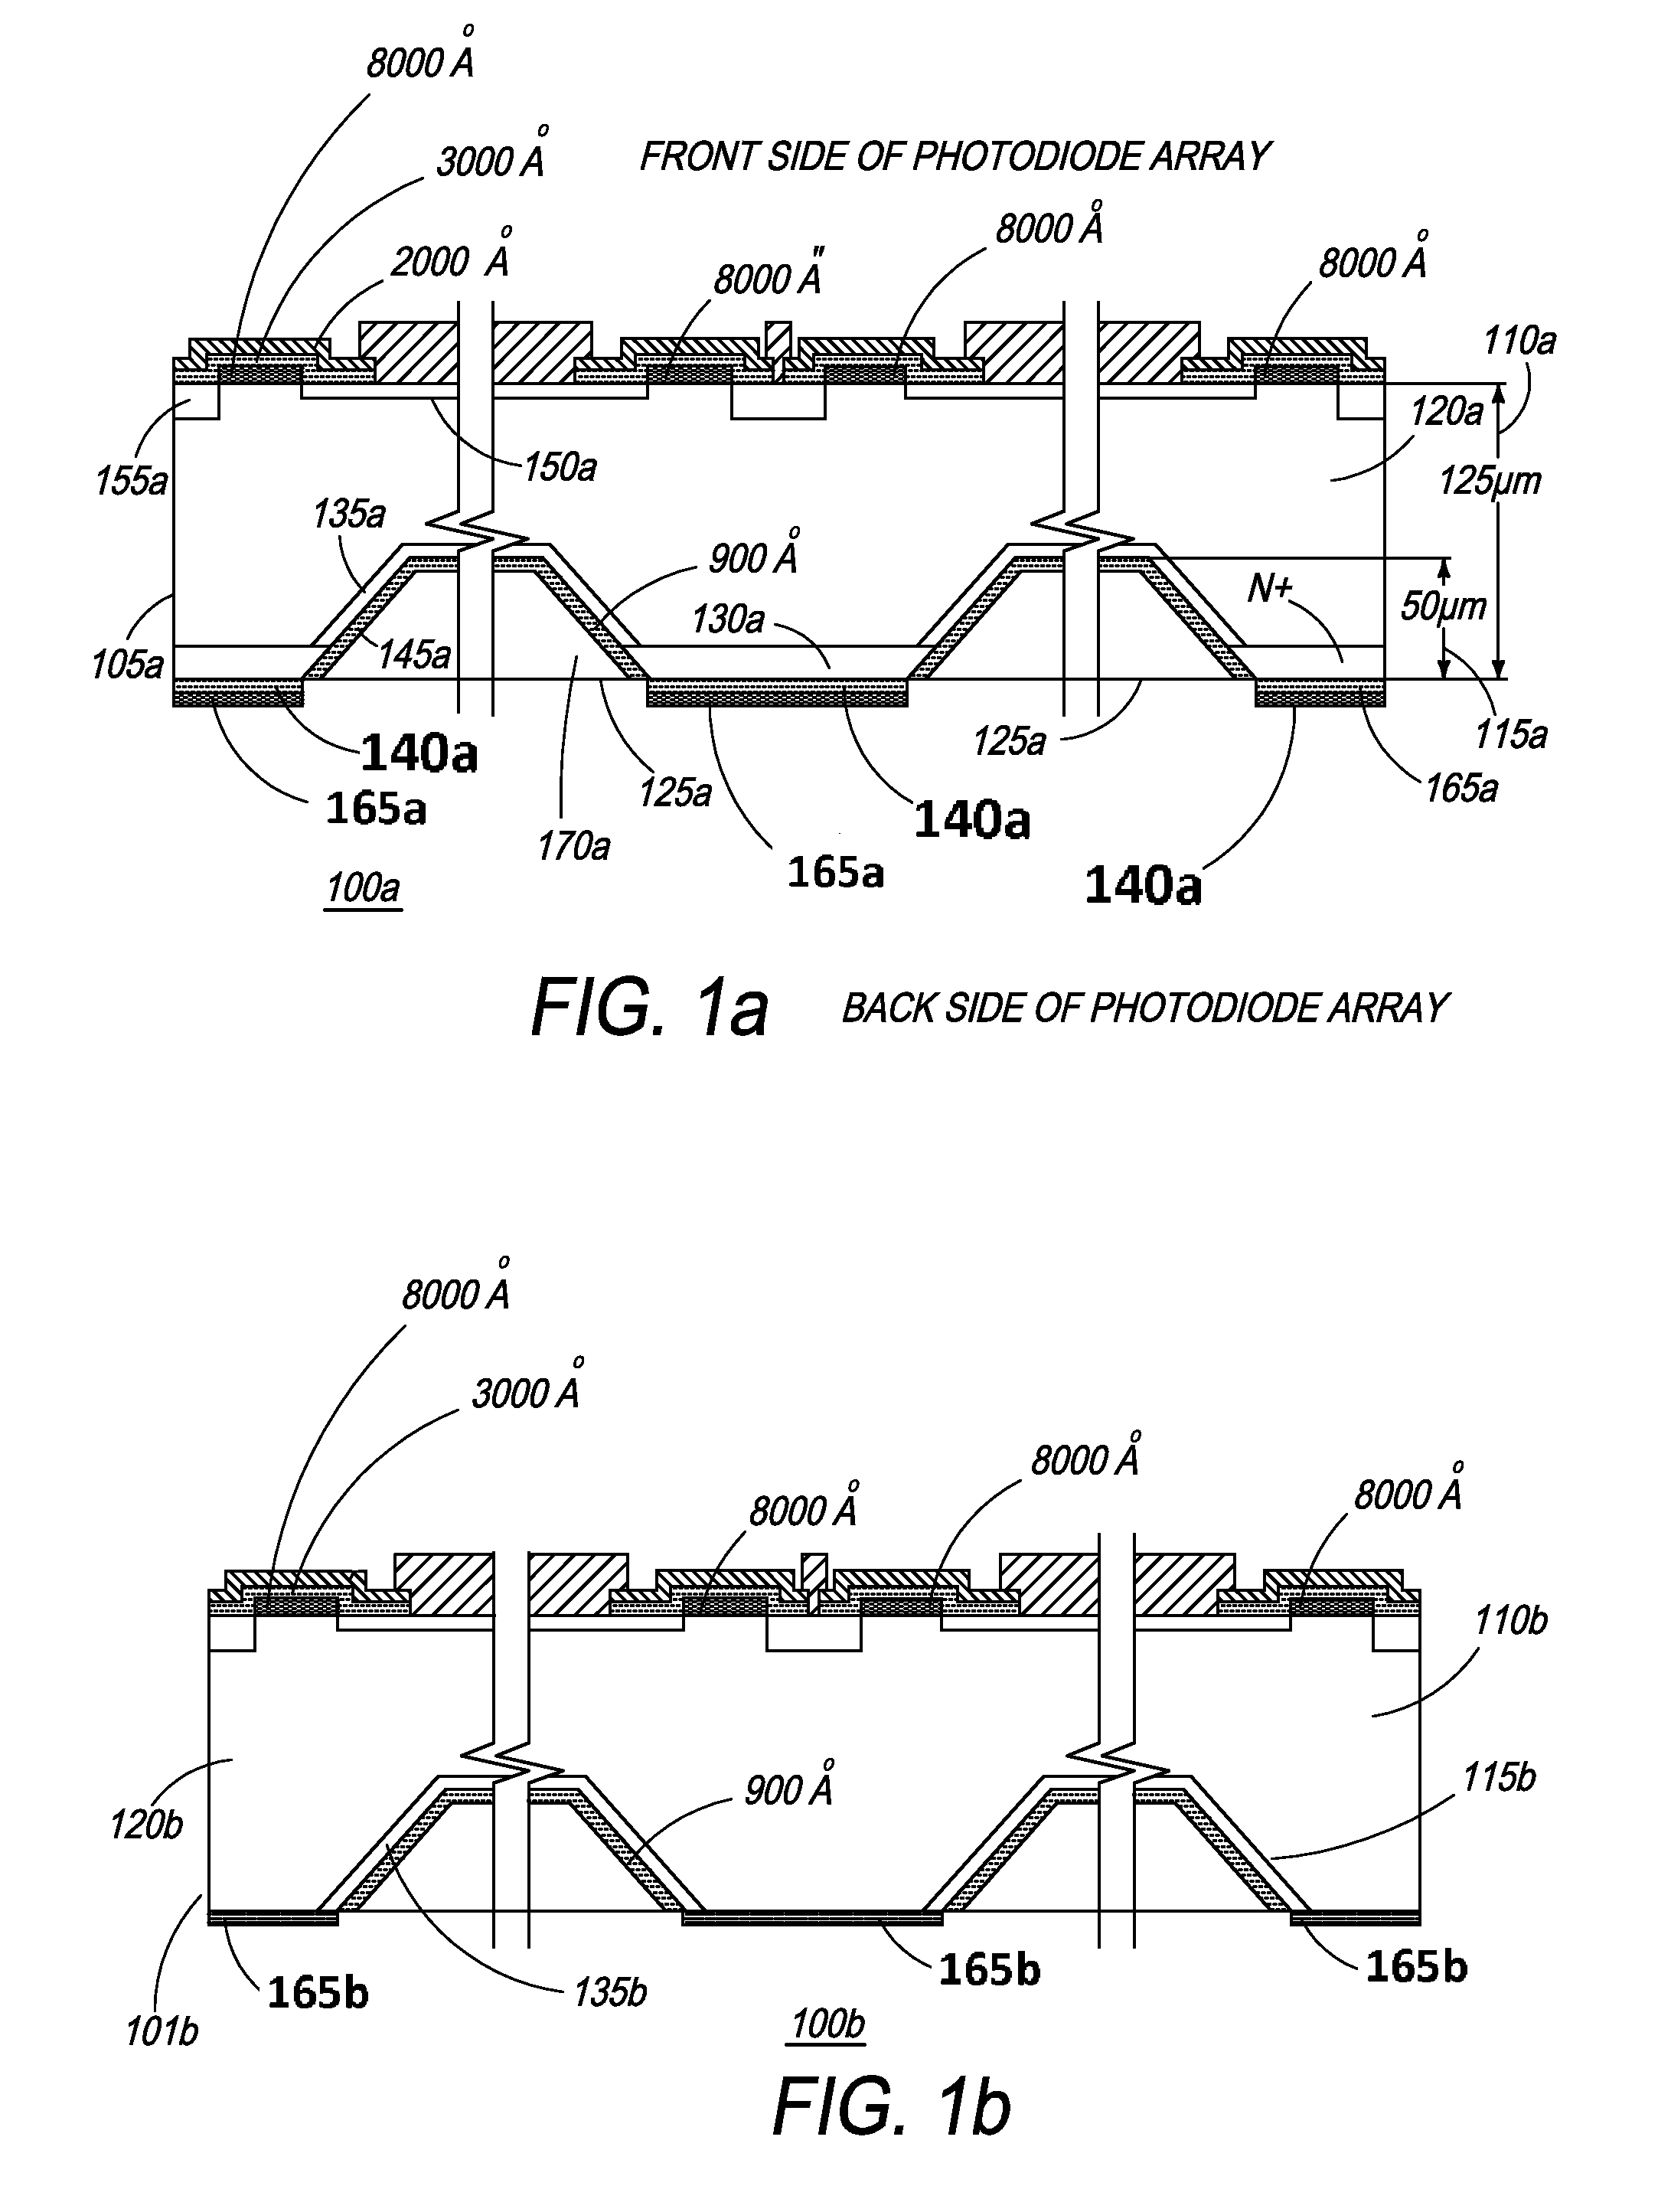 Thin wafer detectors with improved radiation damage and crosstalk characteristics